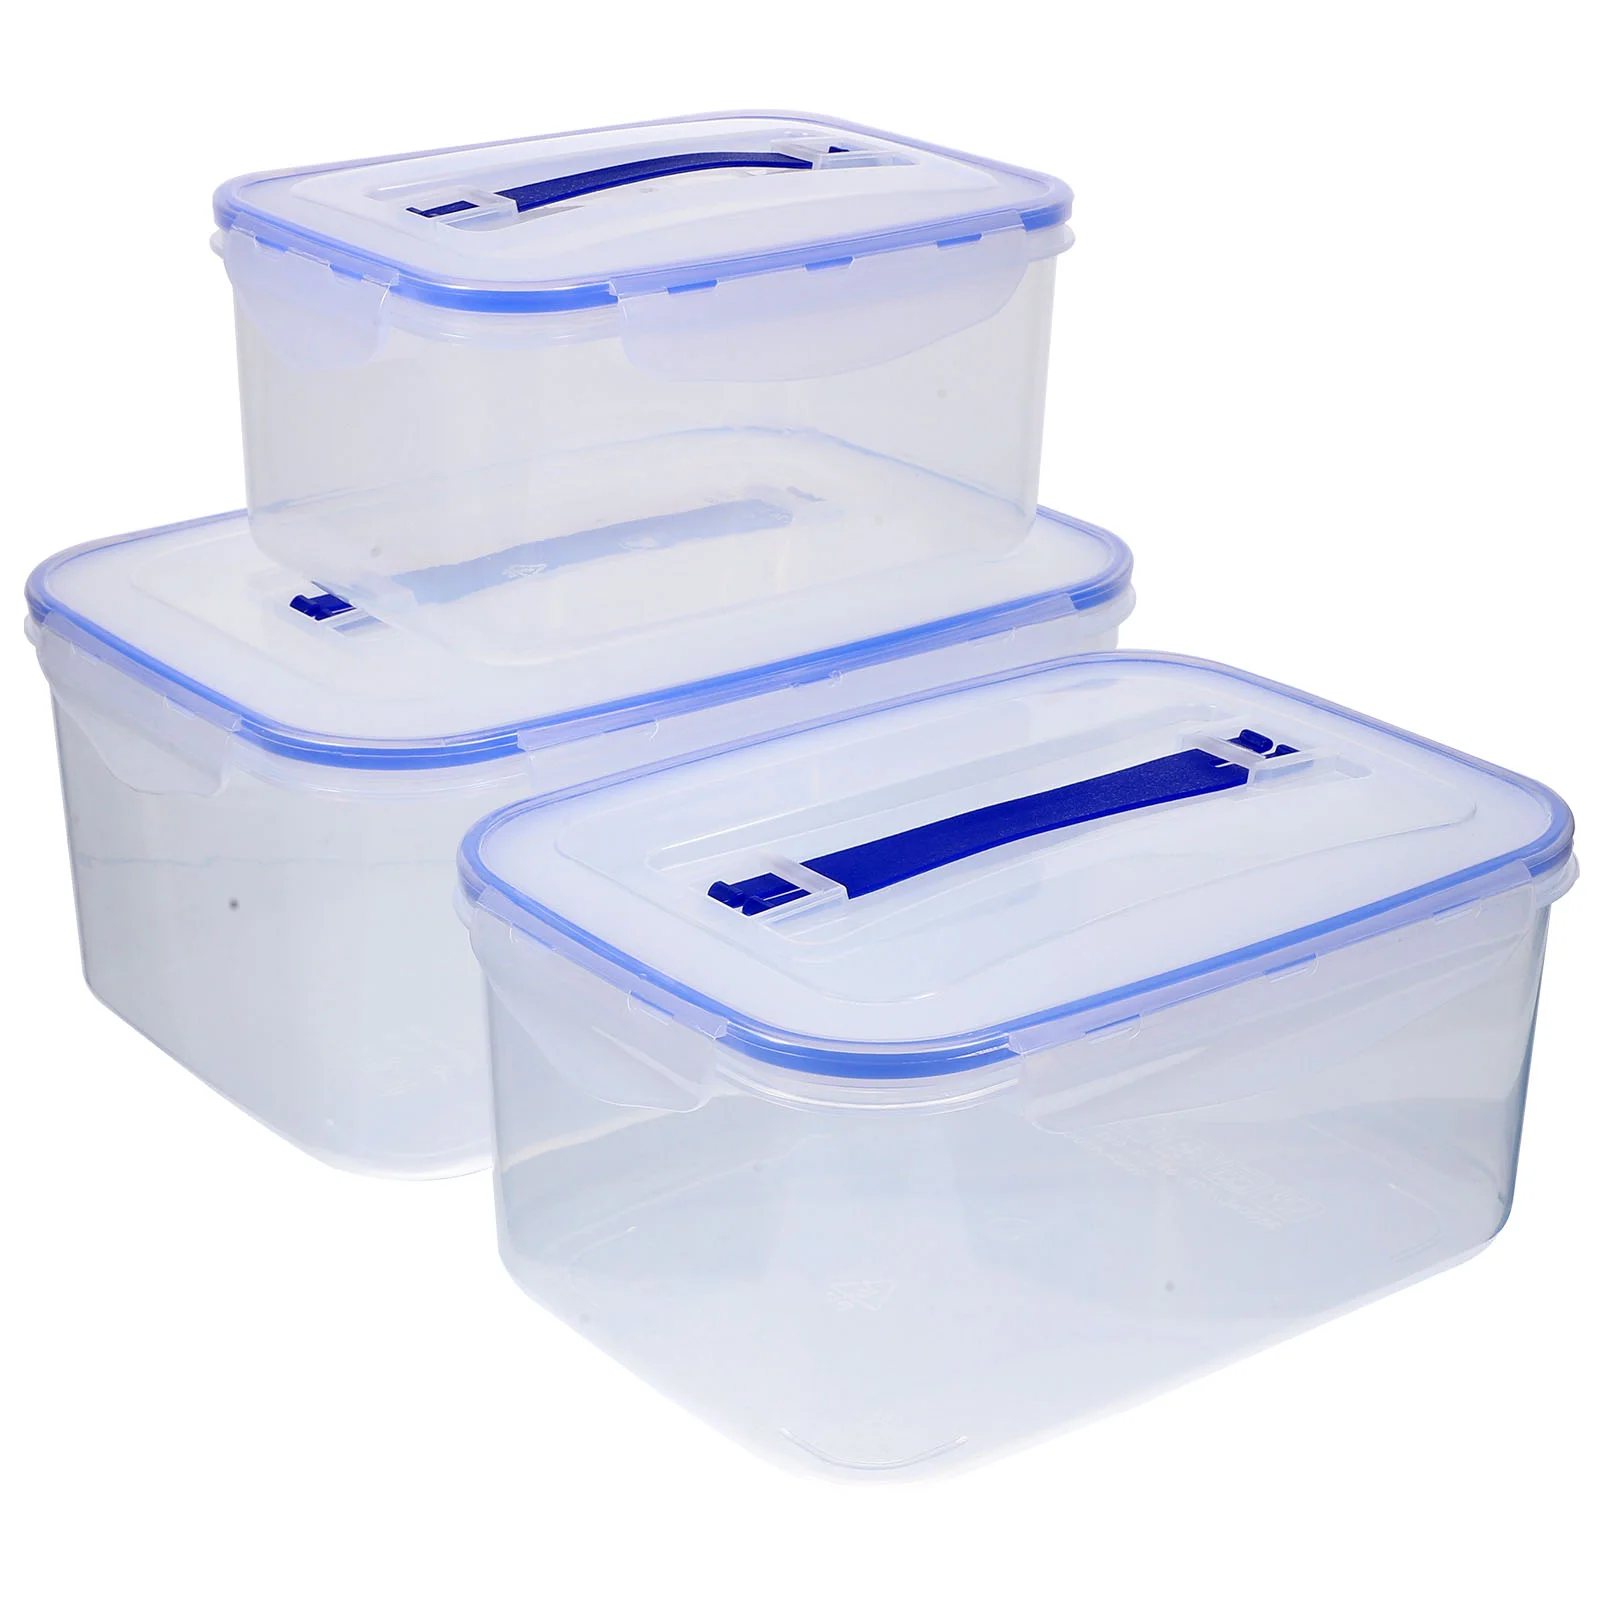 

3 Pcs Plastic Containers Household Storage Grain Cereals Coffee Beans Food Handle Pp Airtight Kitchen